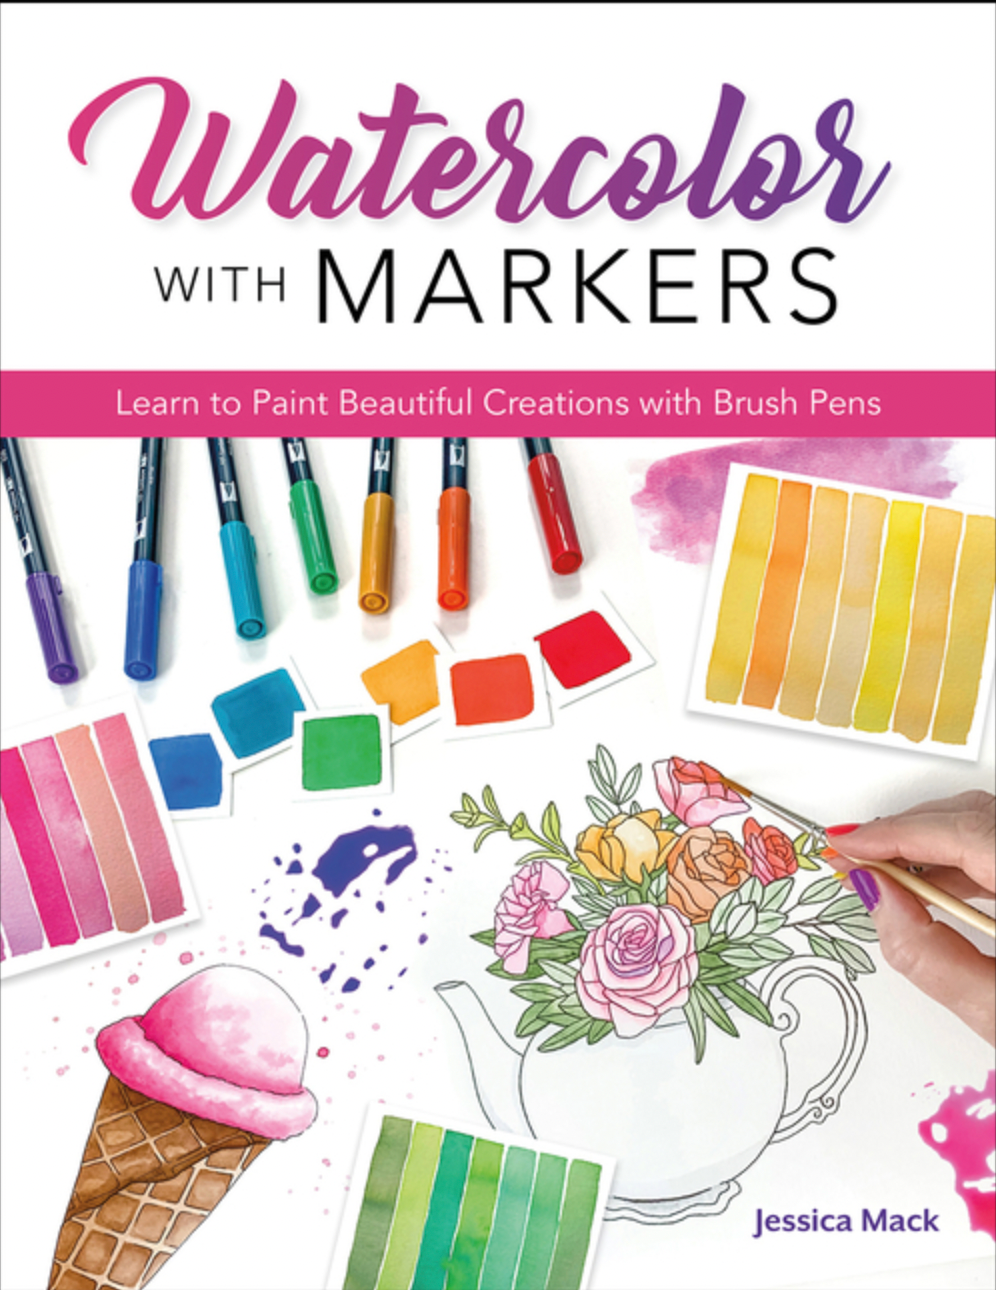 Watercolor with Markers: Learn to Paint Beautiful Creations with Brush Pens (Alt Summit)